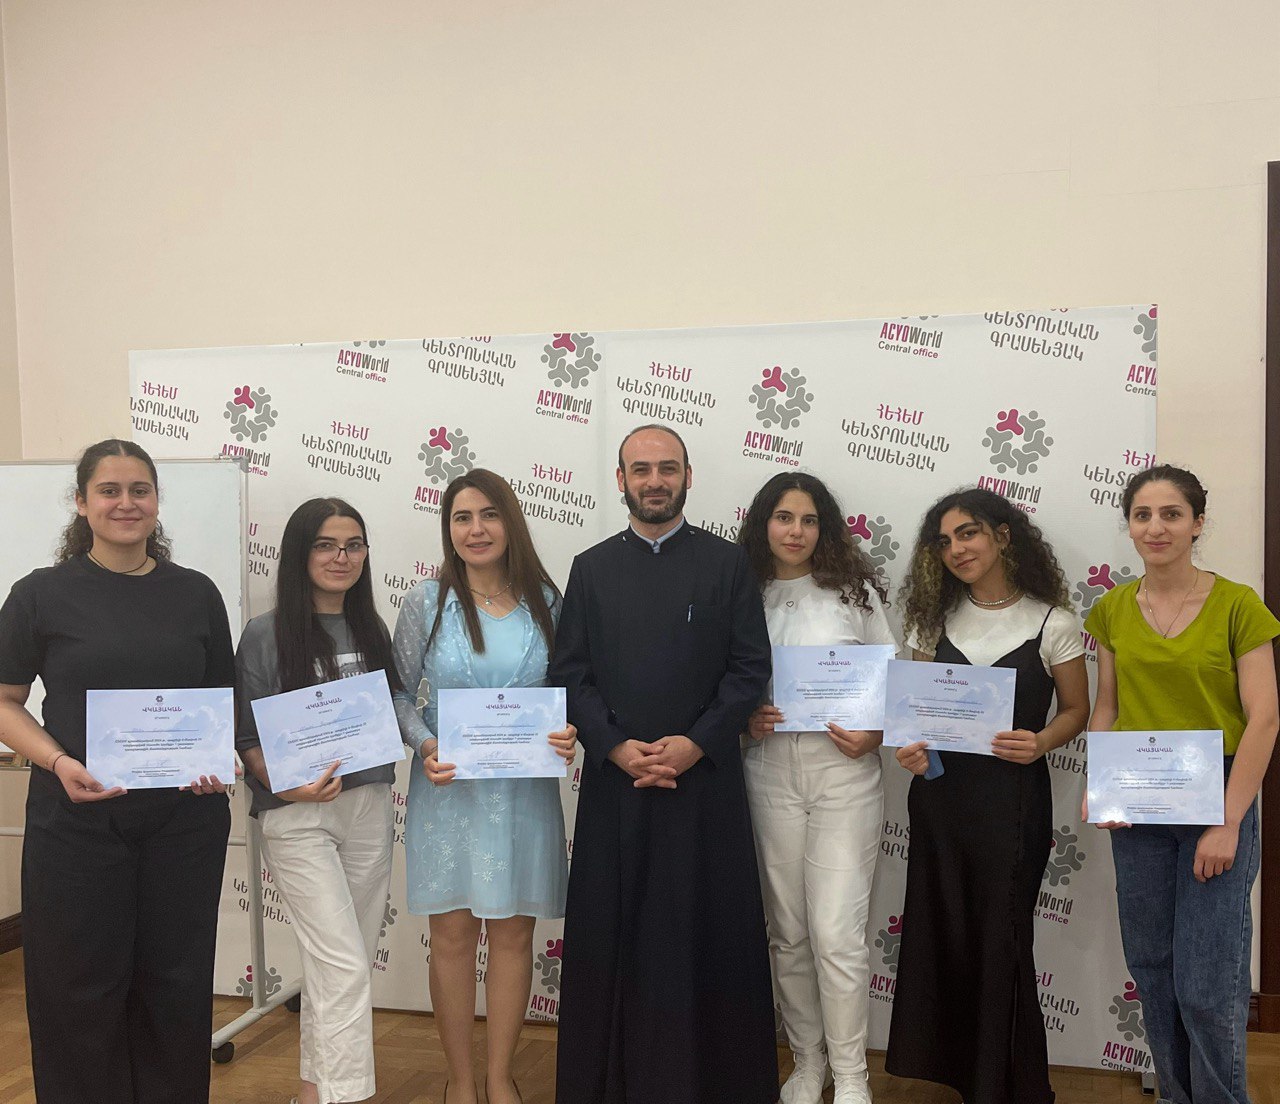 Certificates were presented to the participants of “God’s will” ACYOWorld course.